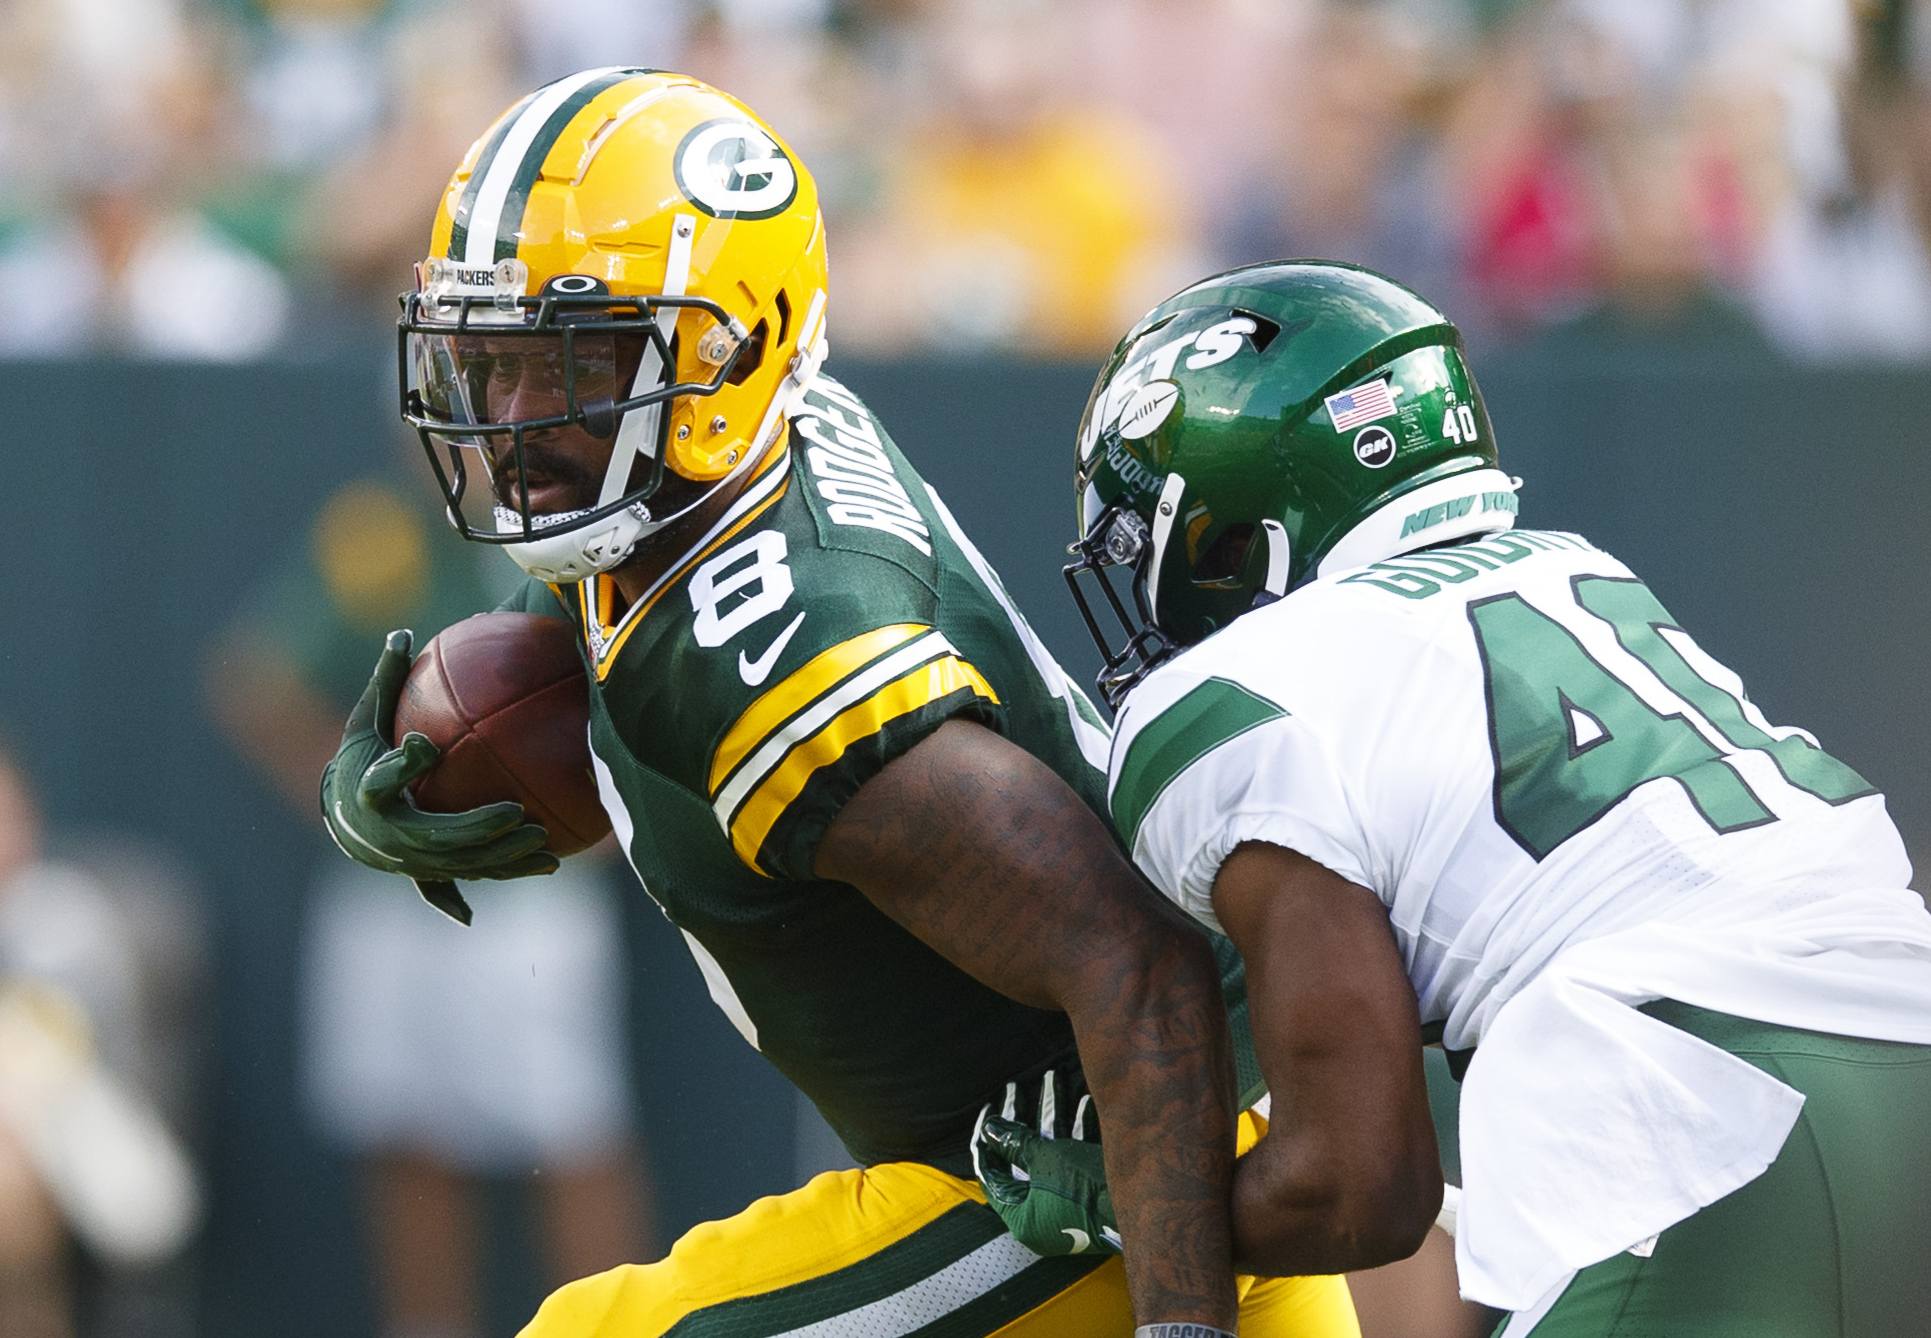 NFL: New York Jets at Green Bay Packers